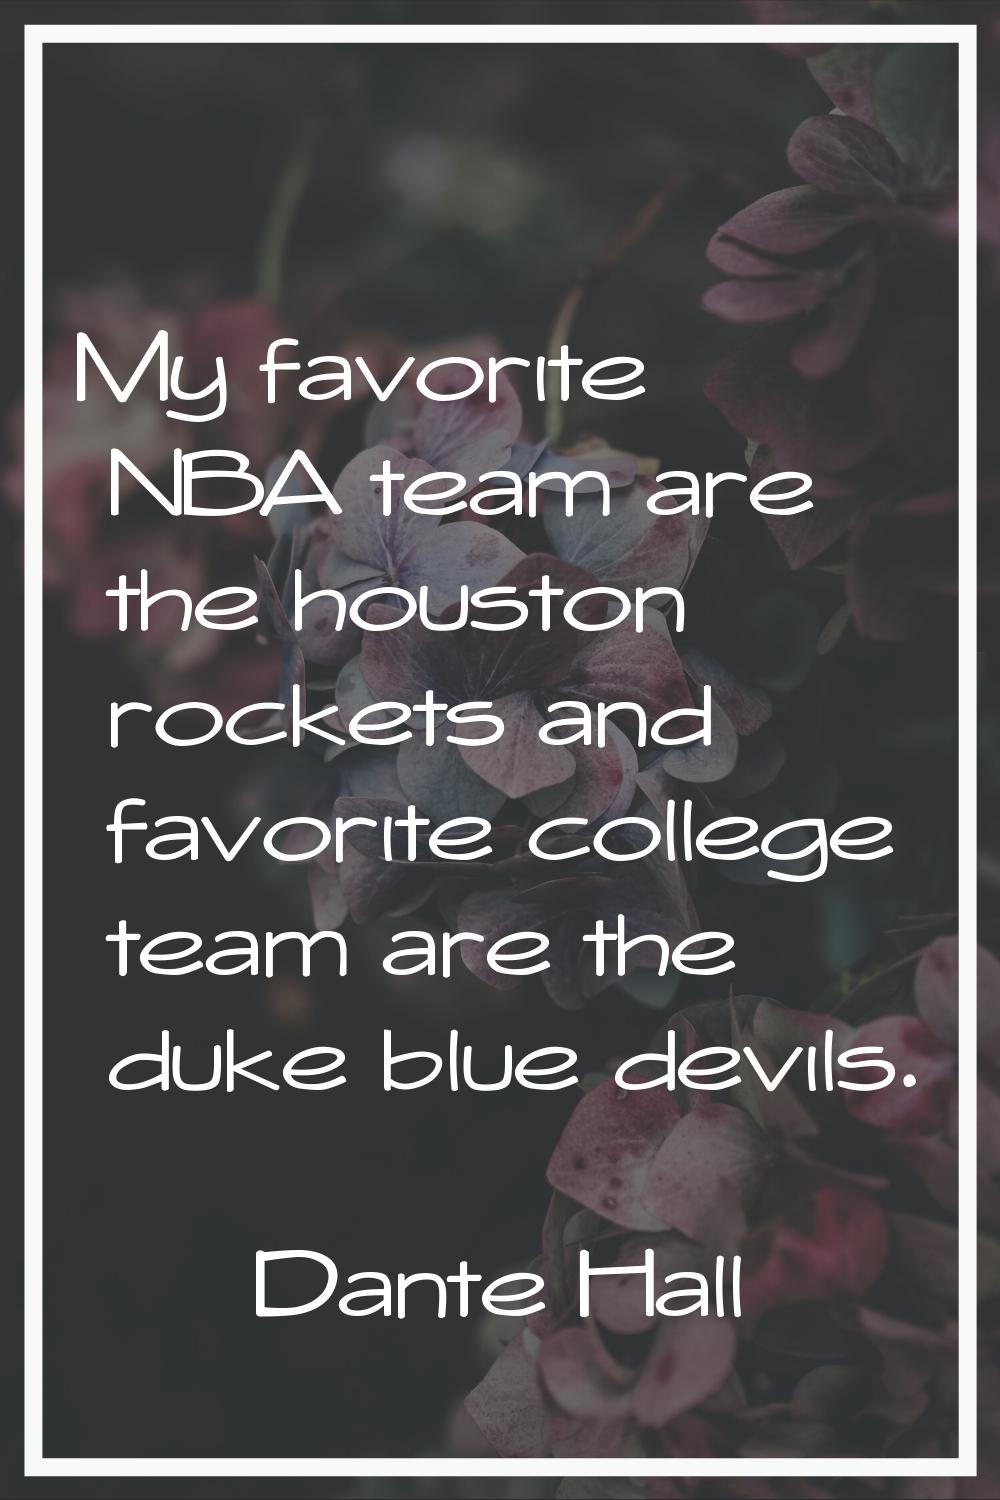 My favorite NBA team are the houston rockets and favorite college team are the duke blue devils.